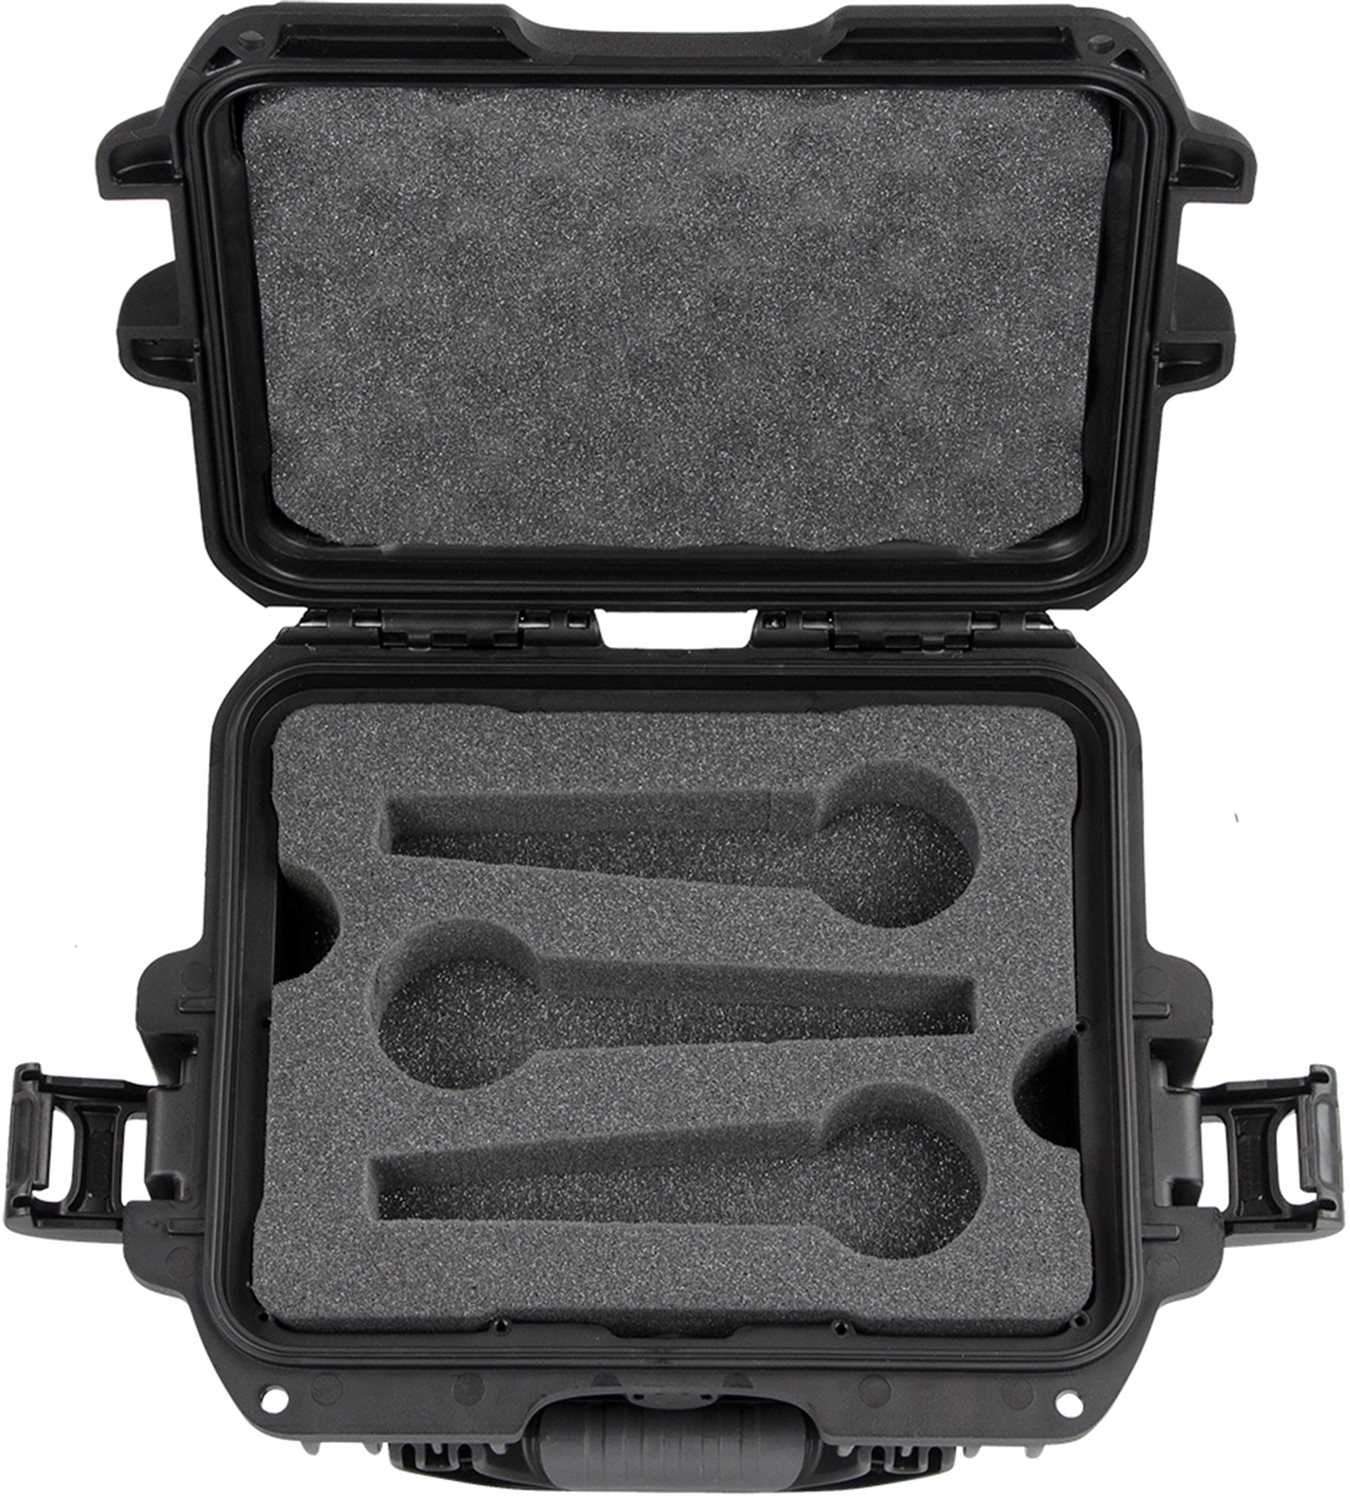 Gator GM-06-MIC-WP Waterproof Mic Case for 6 Mics - ProSound and Stage Lighting